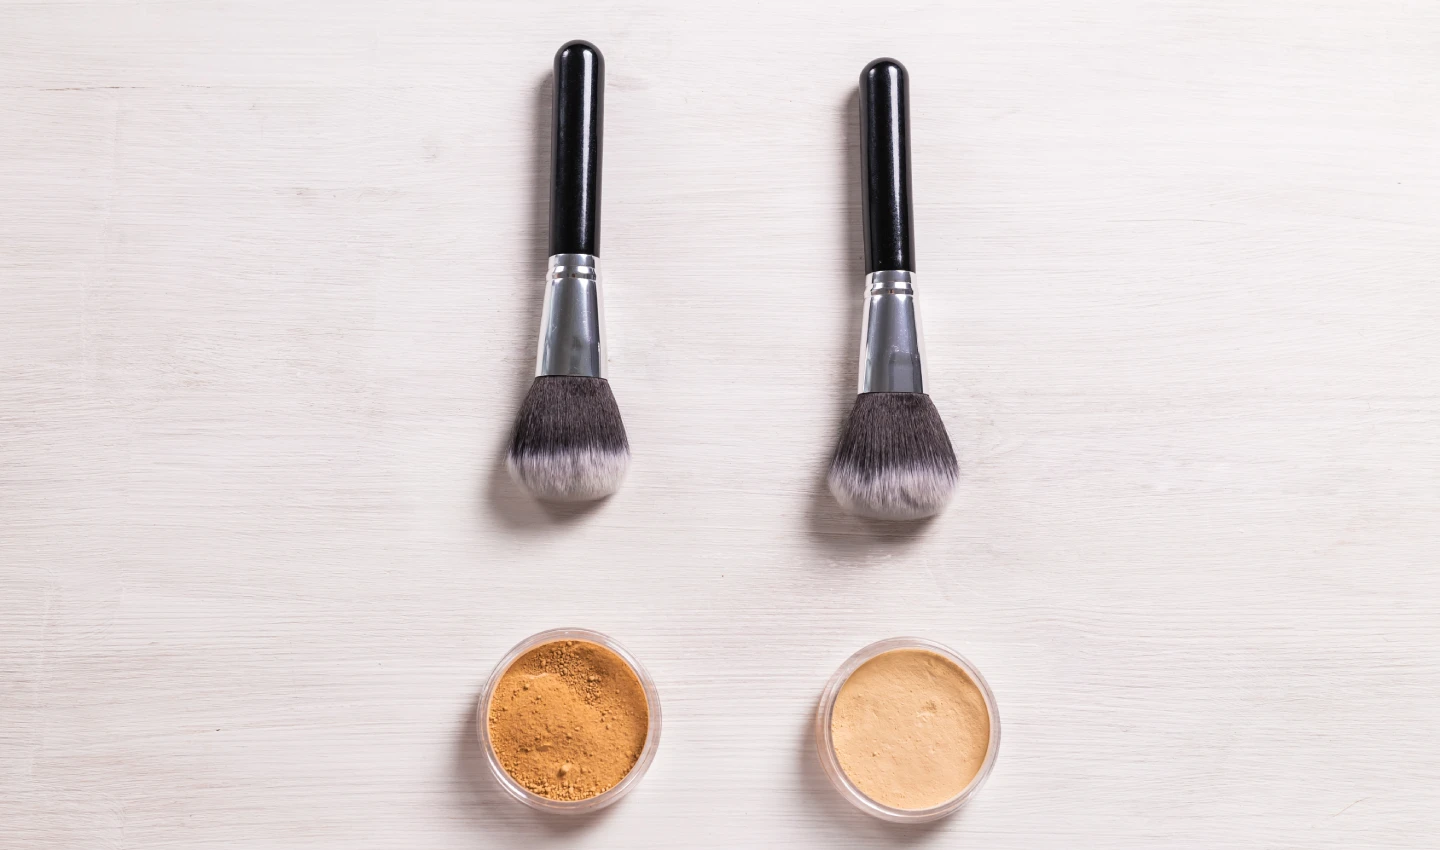 Two brushes of foundation, one on top of two batches of liquid foundation and the other on top of two batches of powder foundation, emphasizing the differences between the two types of foundation.